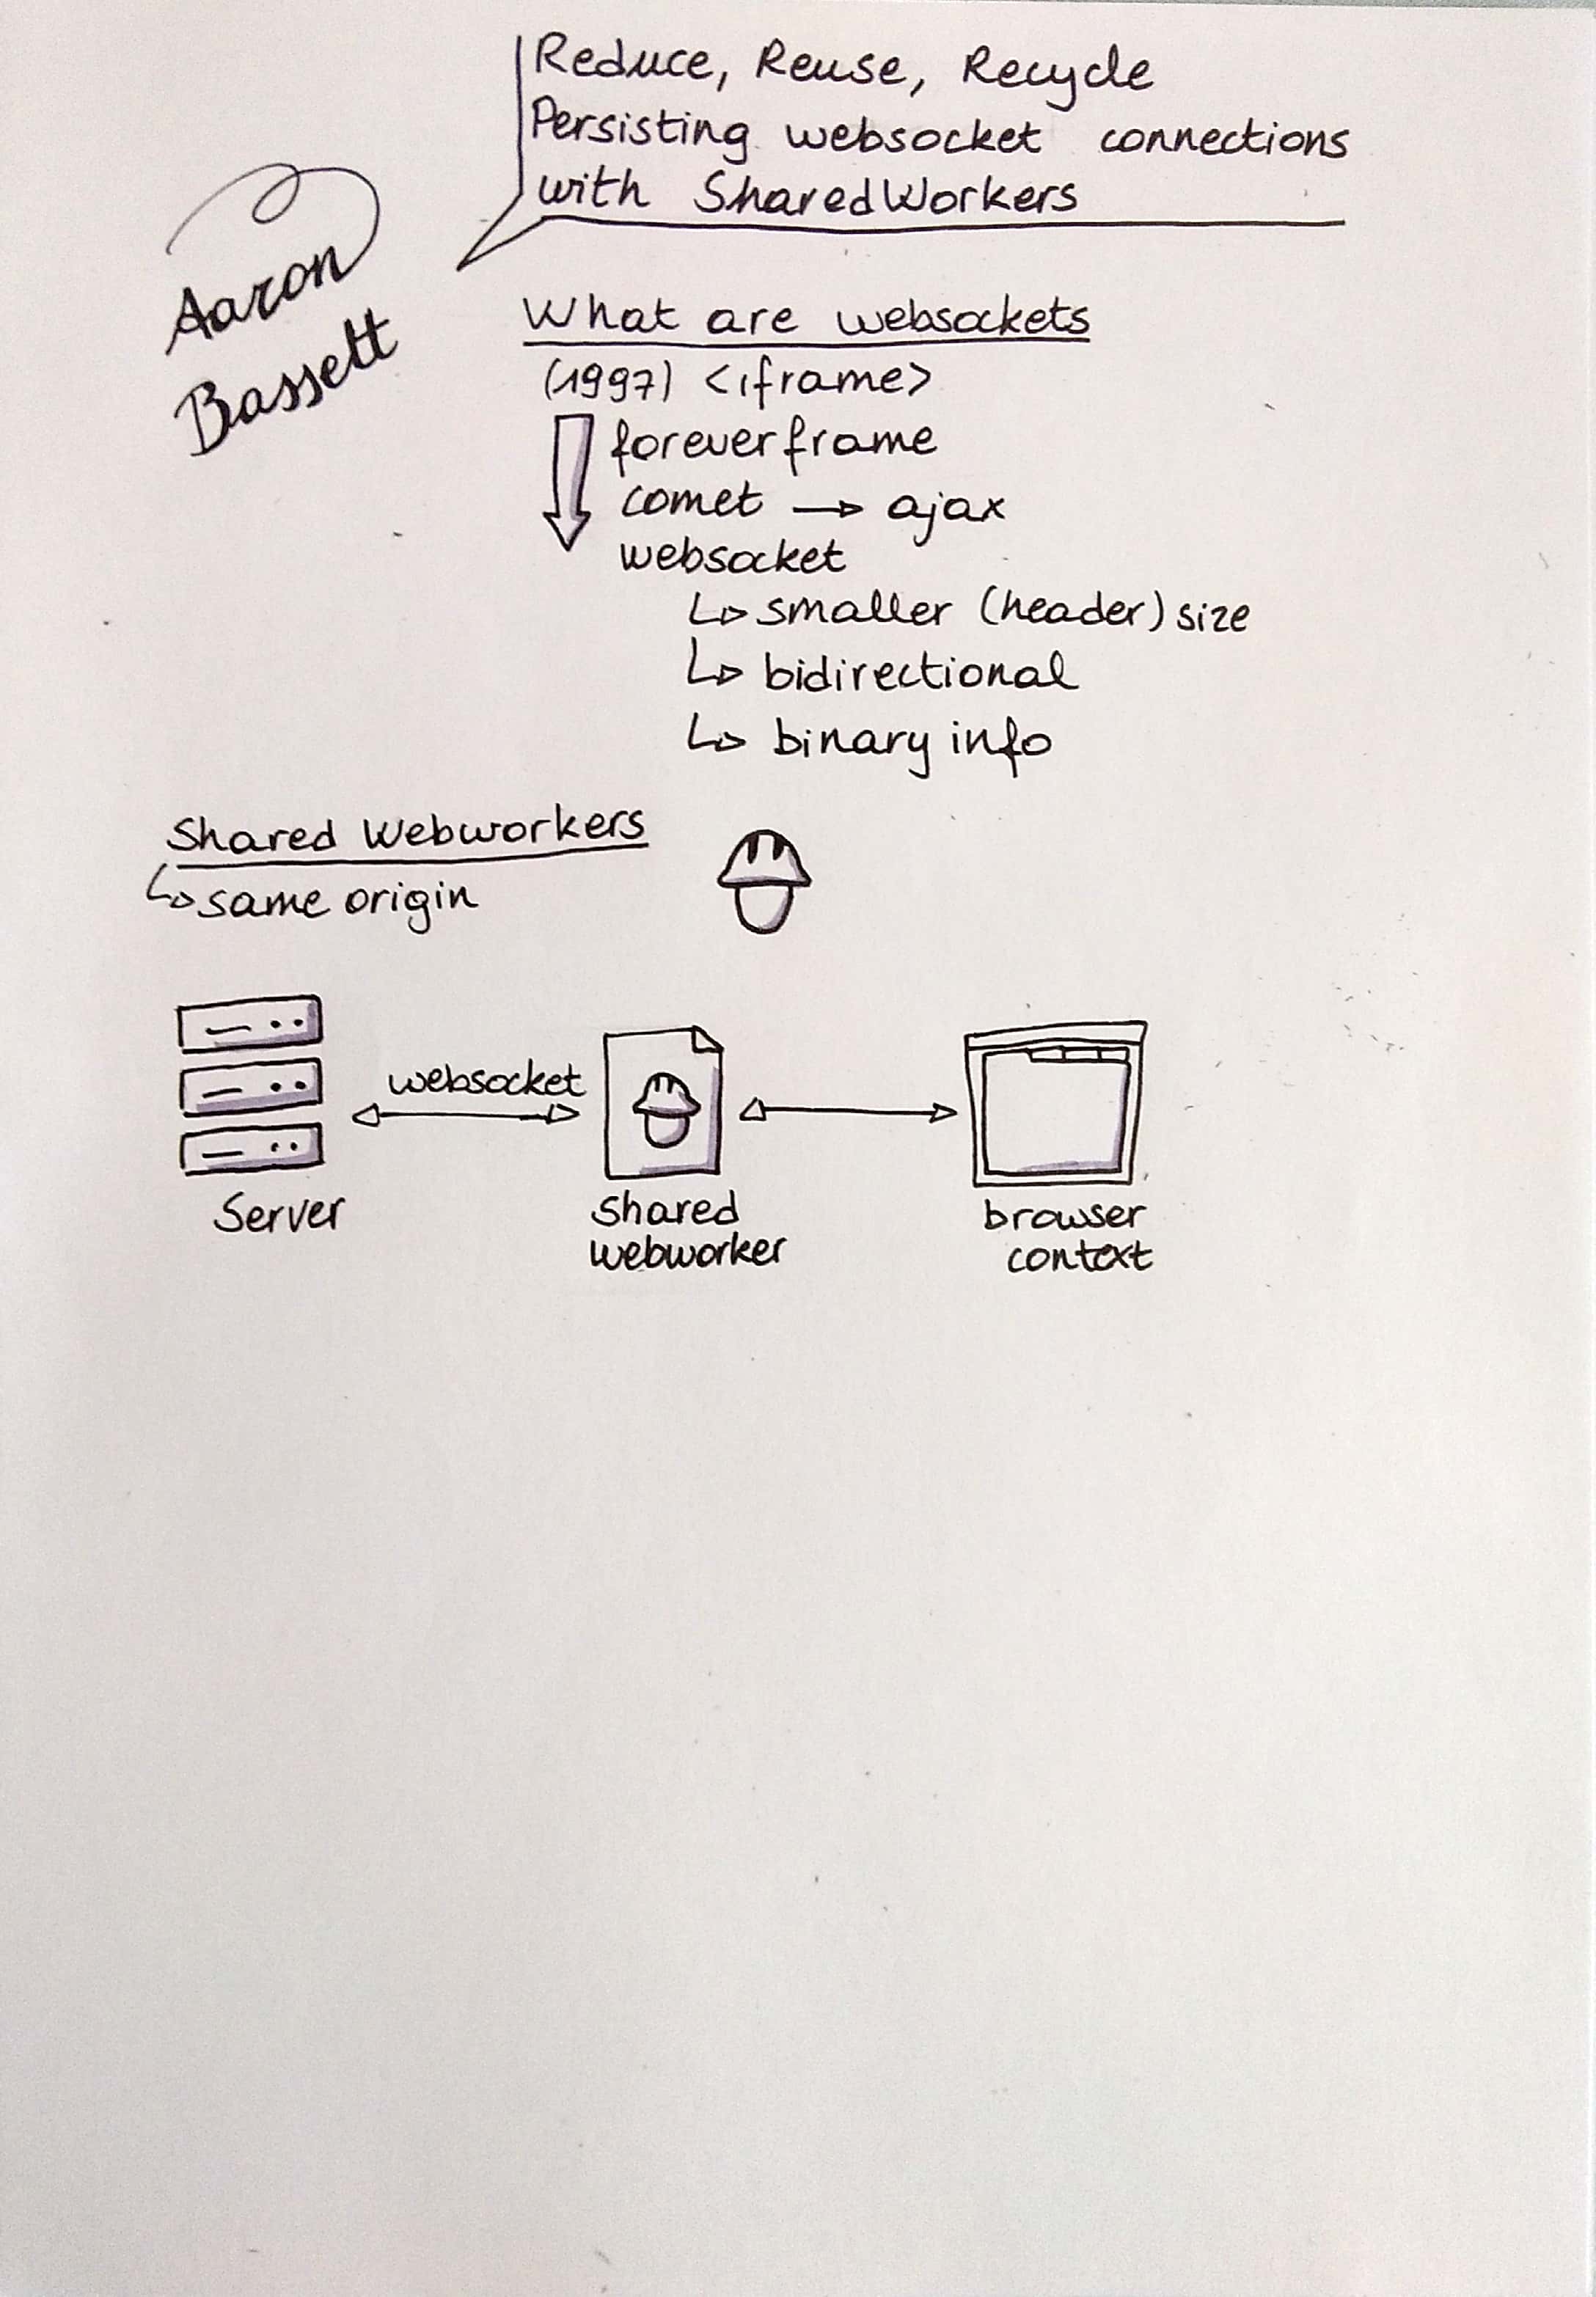 Sketchnote of Reduce, Reuse, Recycle - Persisting WebSocket connections with SharedWorkers